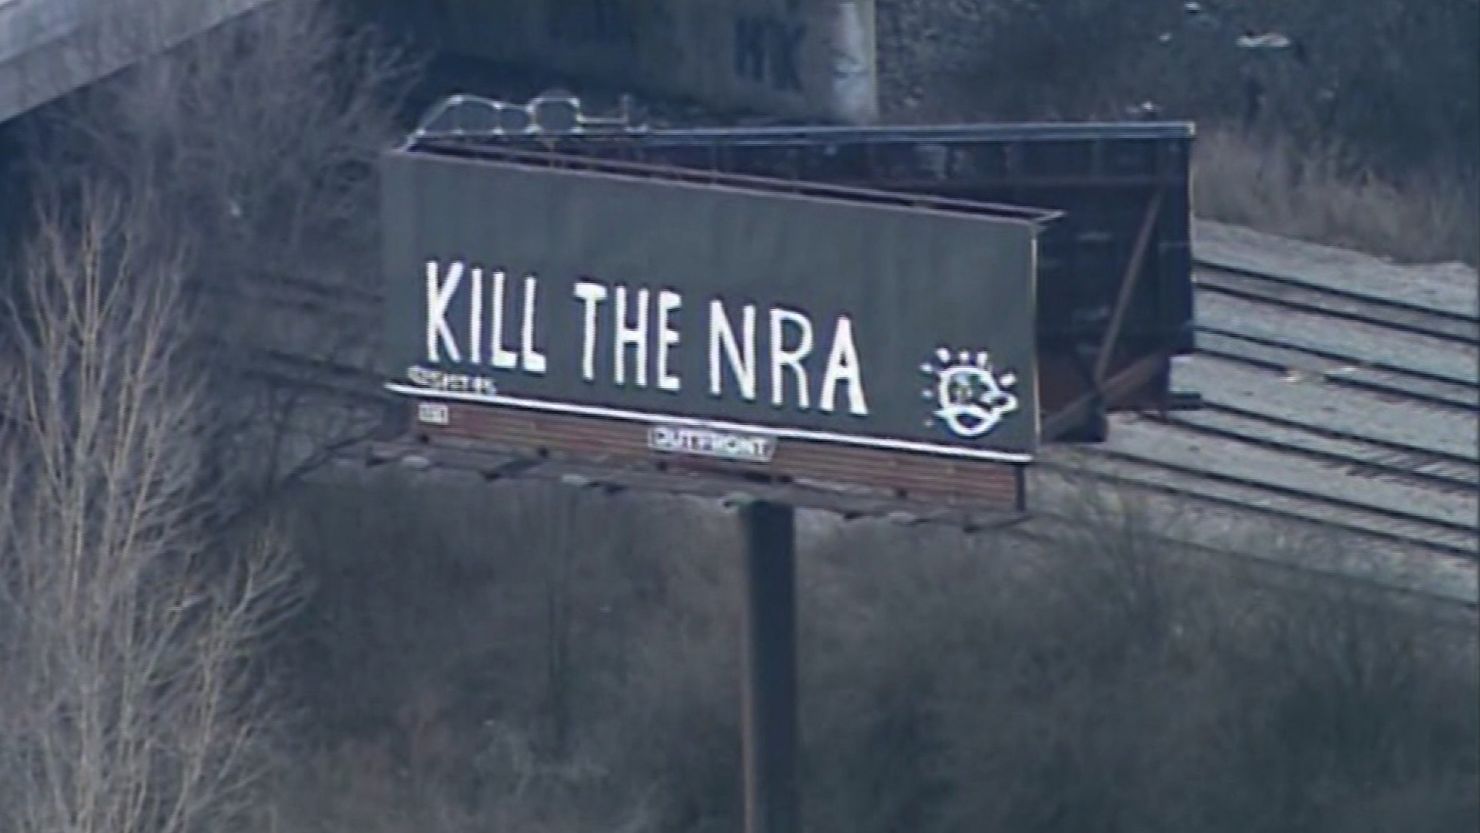 The billboard's owner said the vandals' slogan was replaced with a public service announcement.